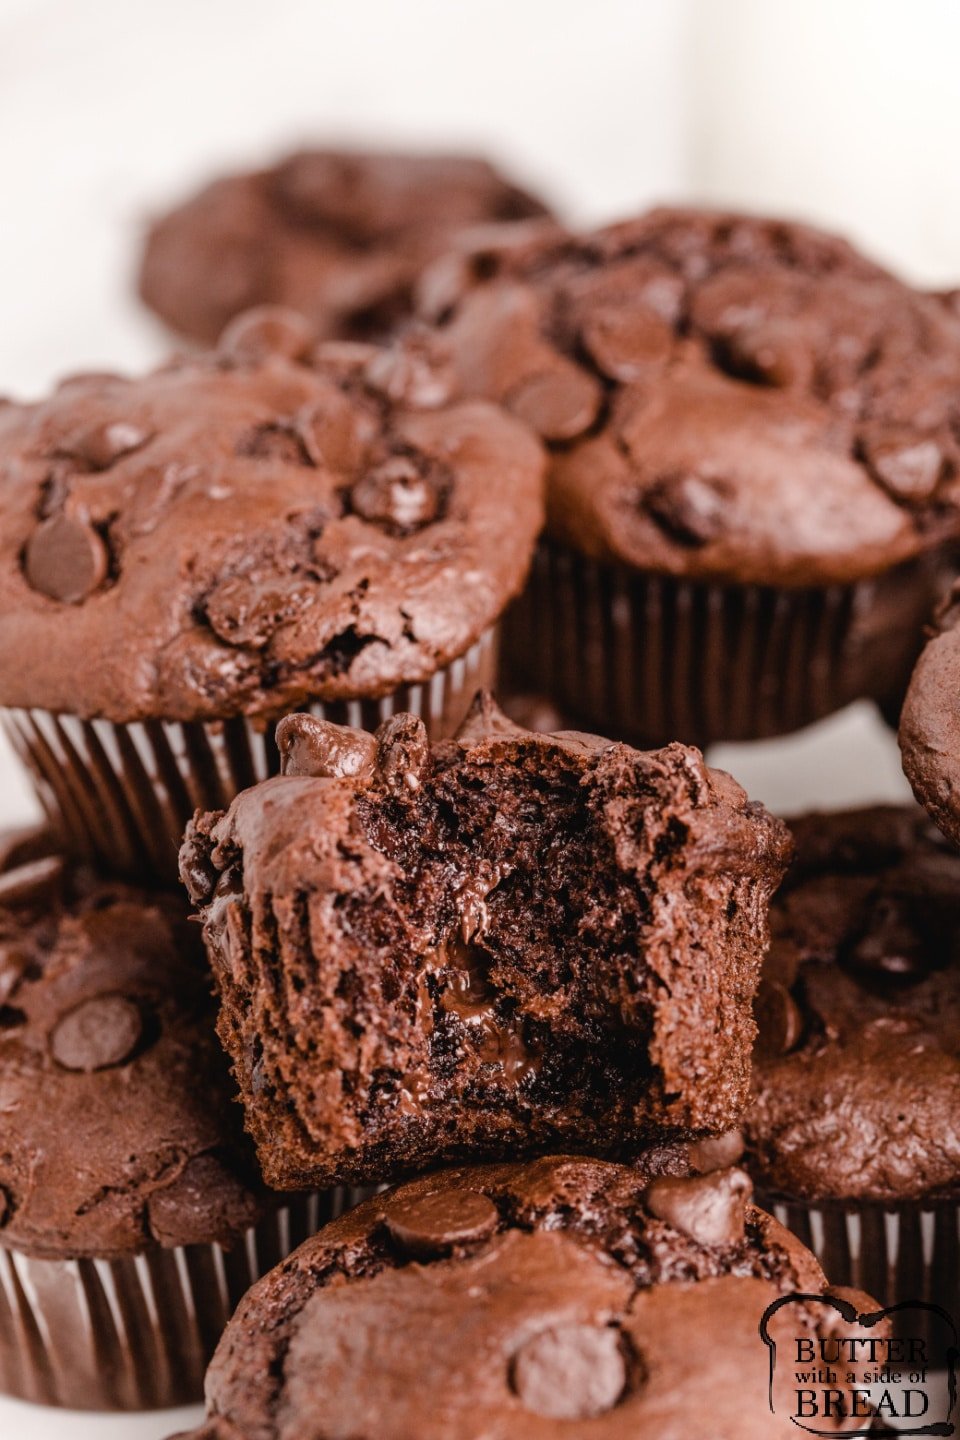 Chocolate chocolate chip muffin recipe made with cake mix and pudding